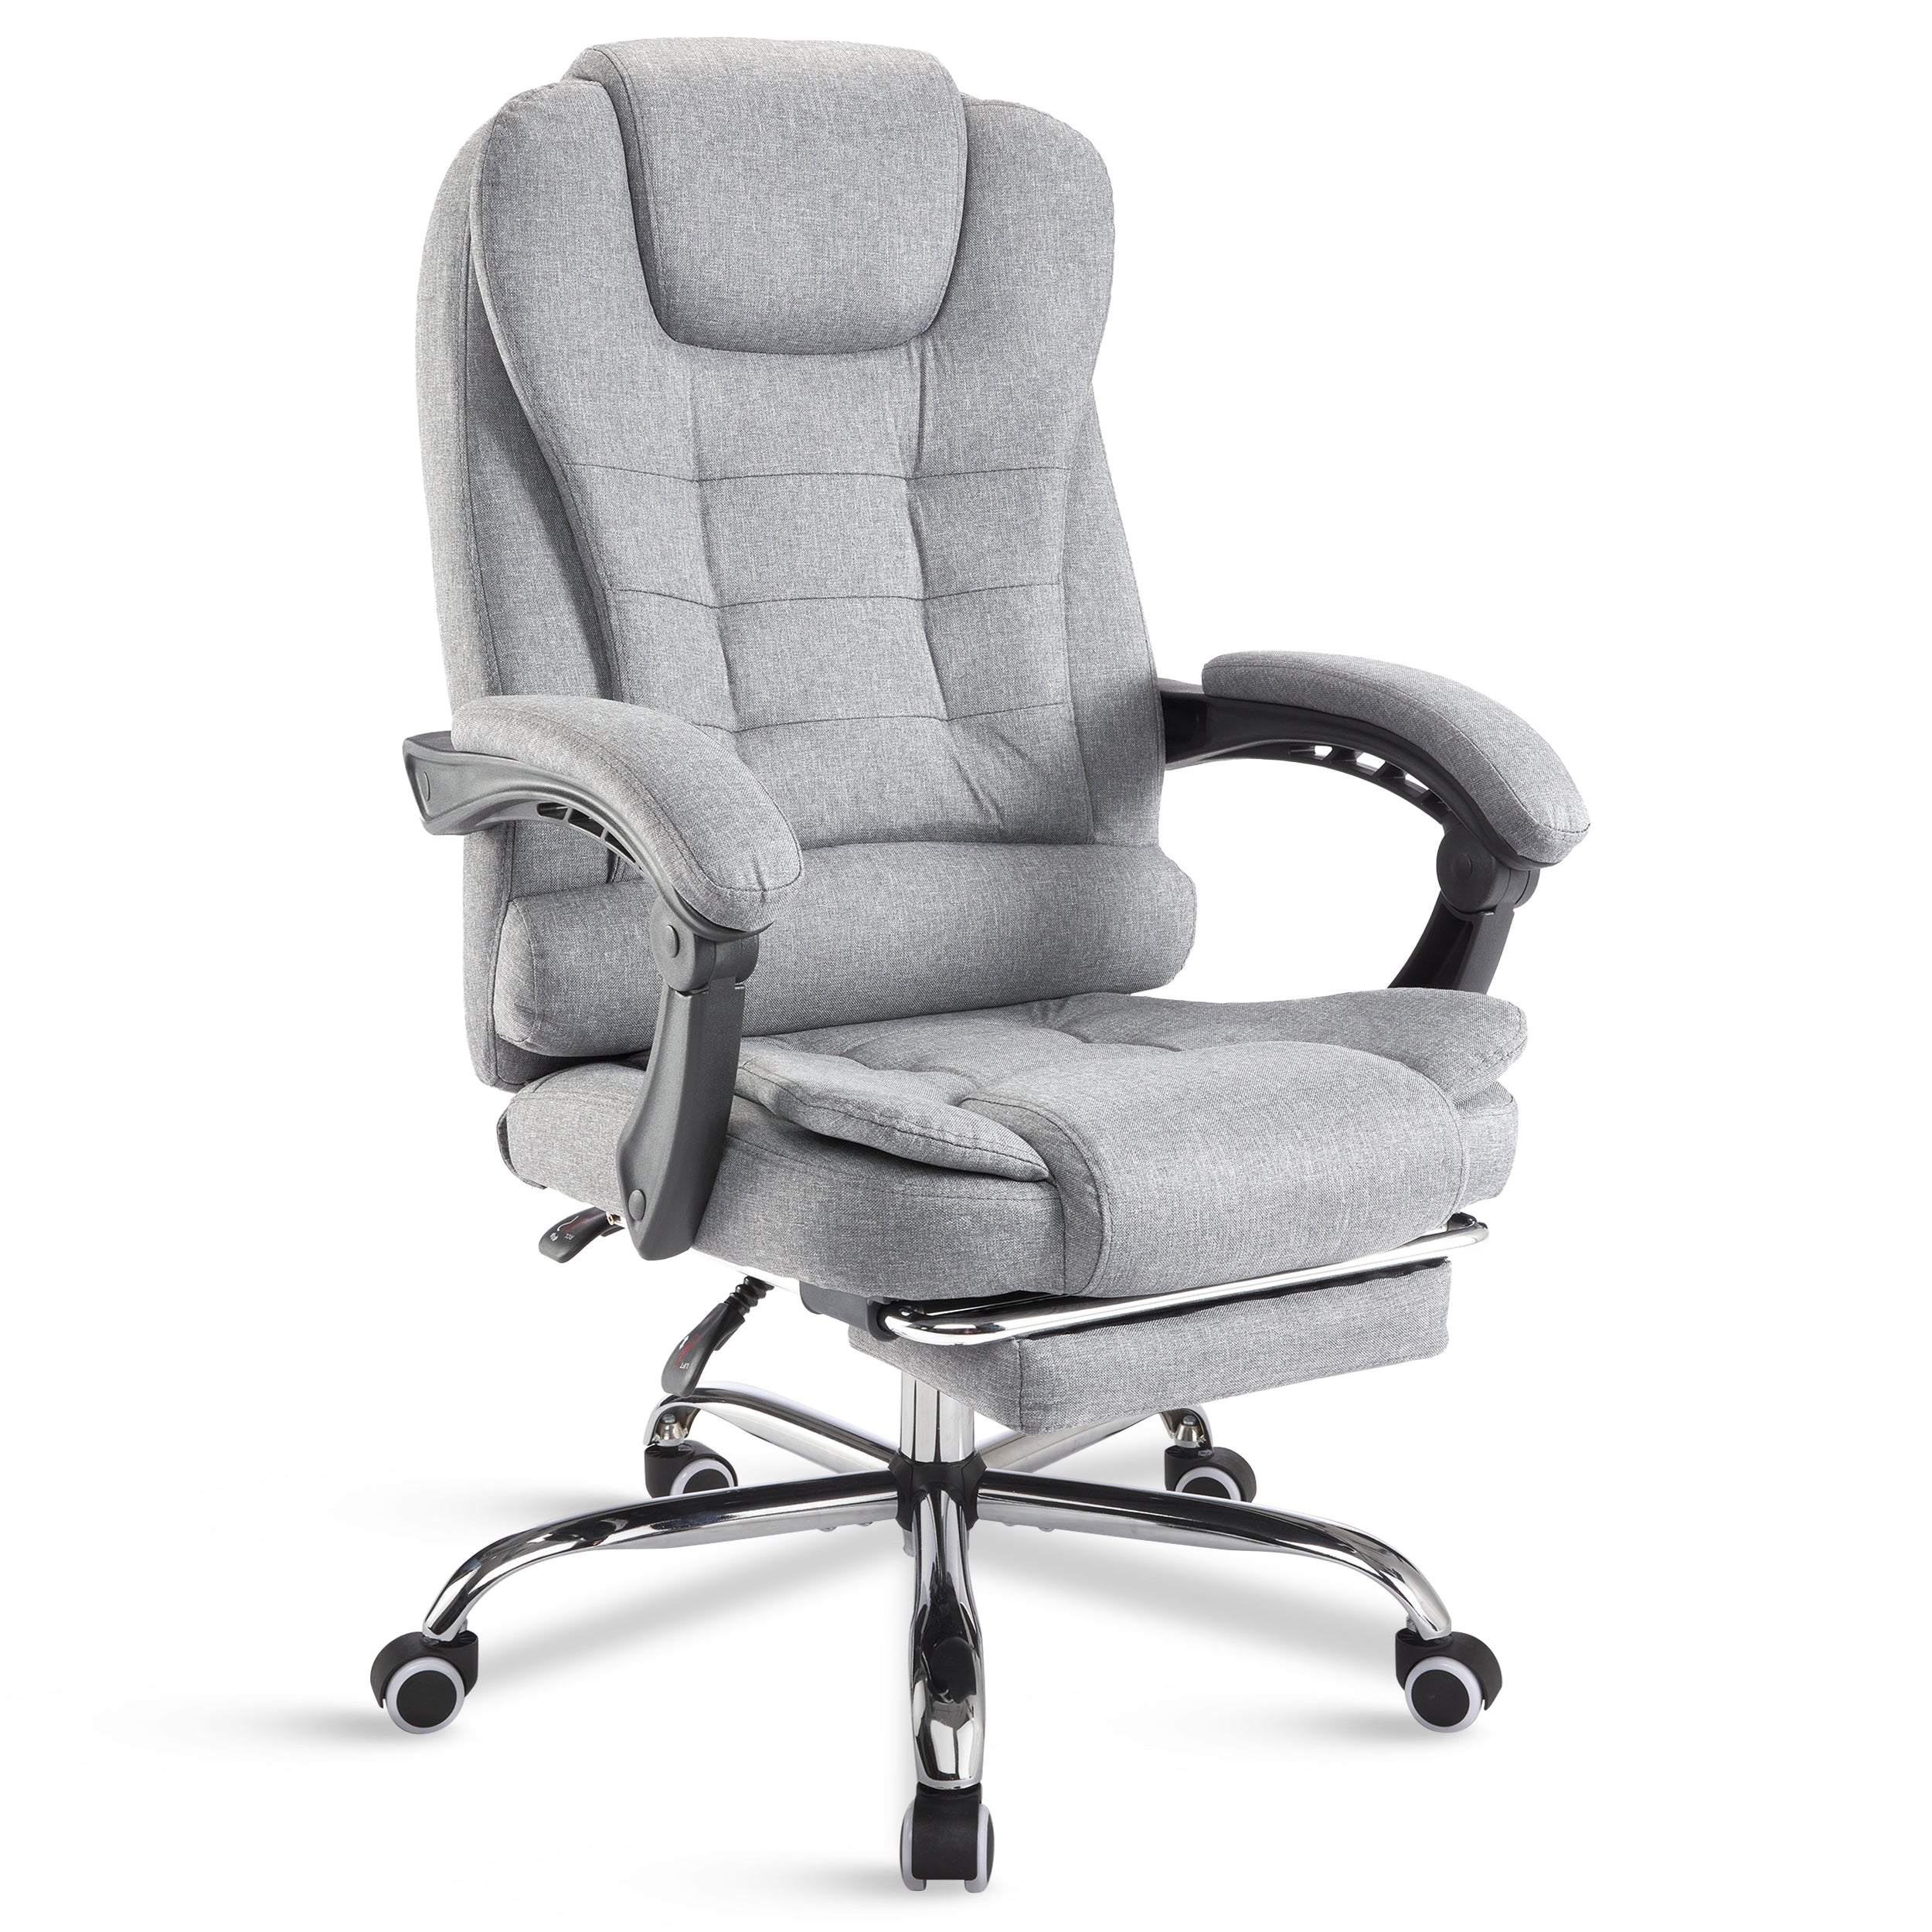 Blisswood Premium Office Recliner Chair: Comfort and Reliability Combined